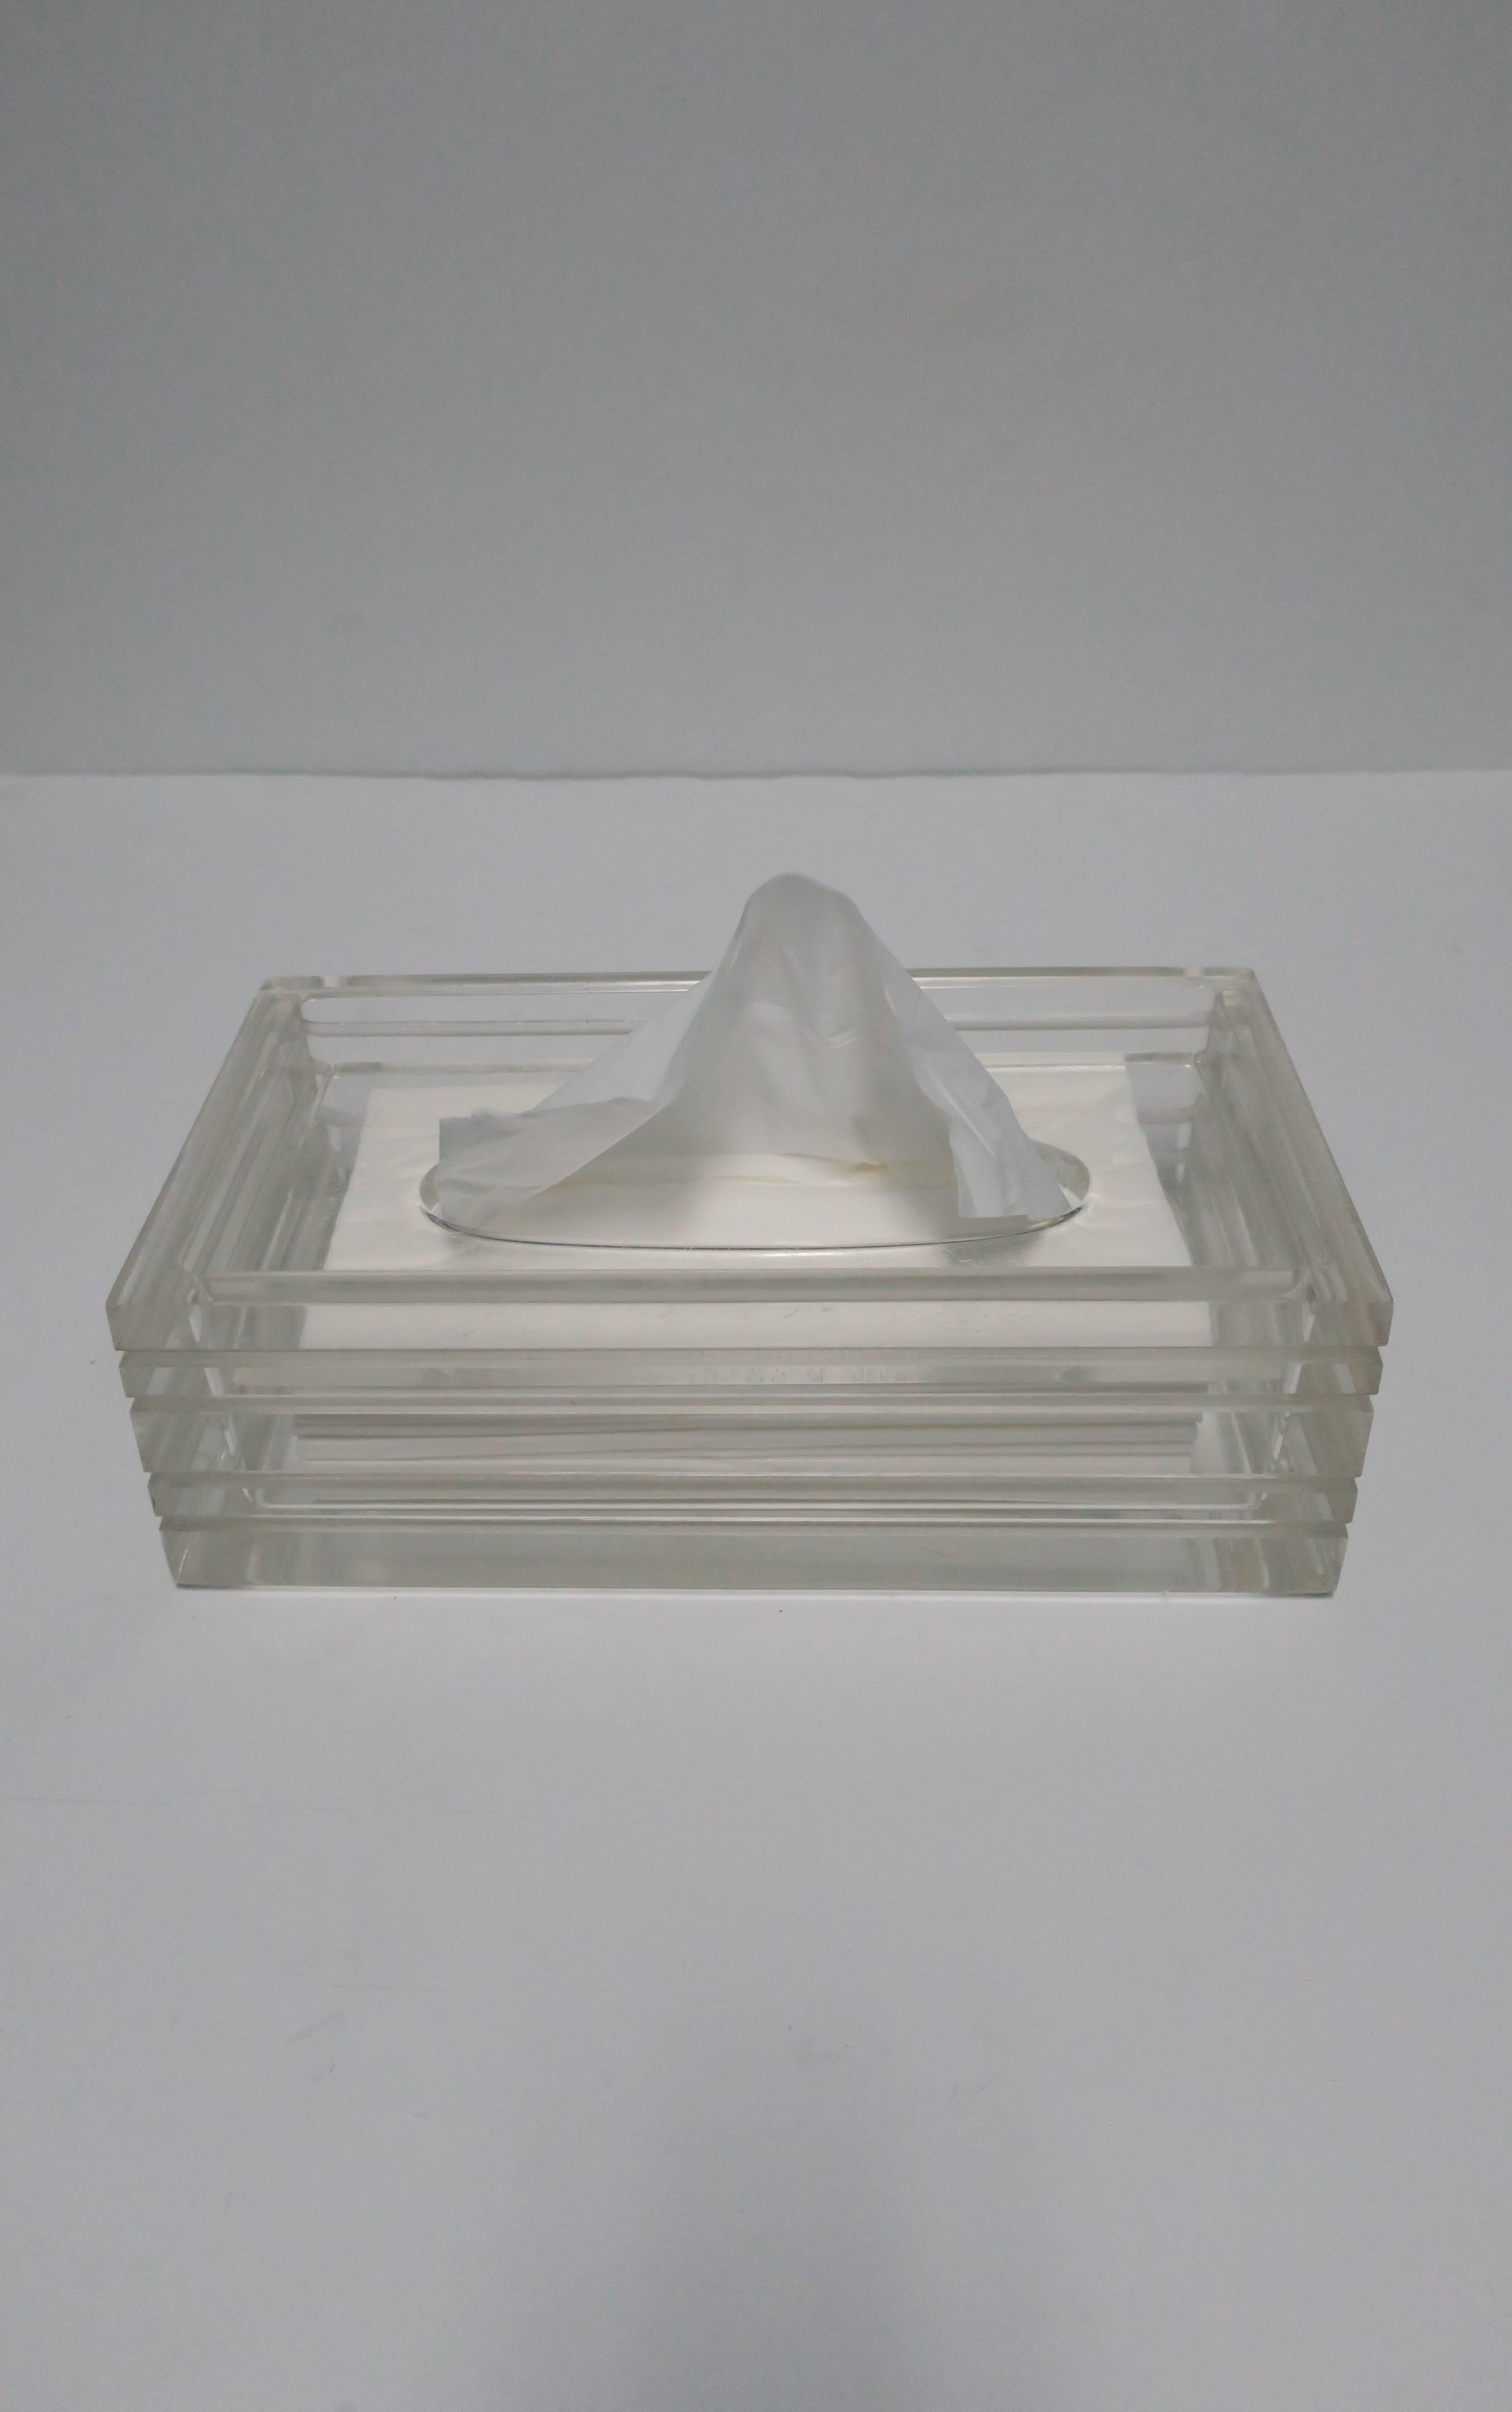 A beautiful and substantial vintage Modern Lucite tissue box in the style of American Designer, Charles Hollis Jones, circa 1970s or later. Substantial Lucite with horizontal indentation detail on all sides. 

